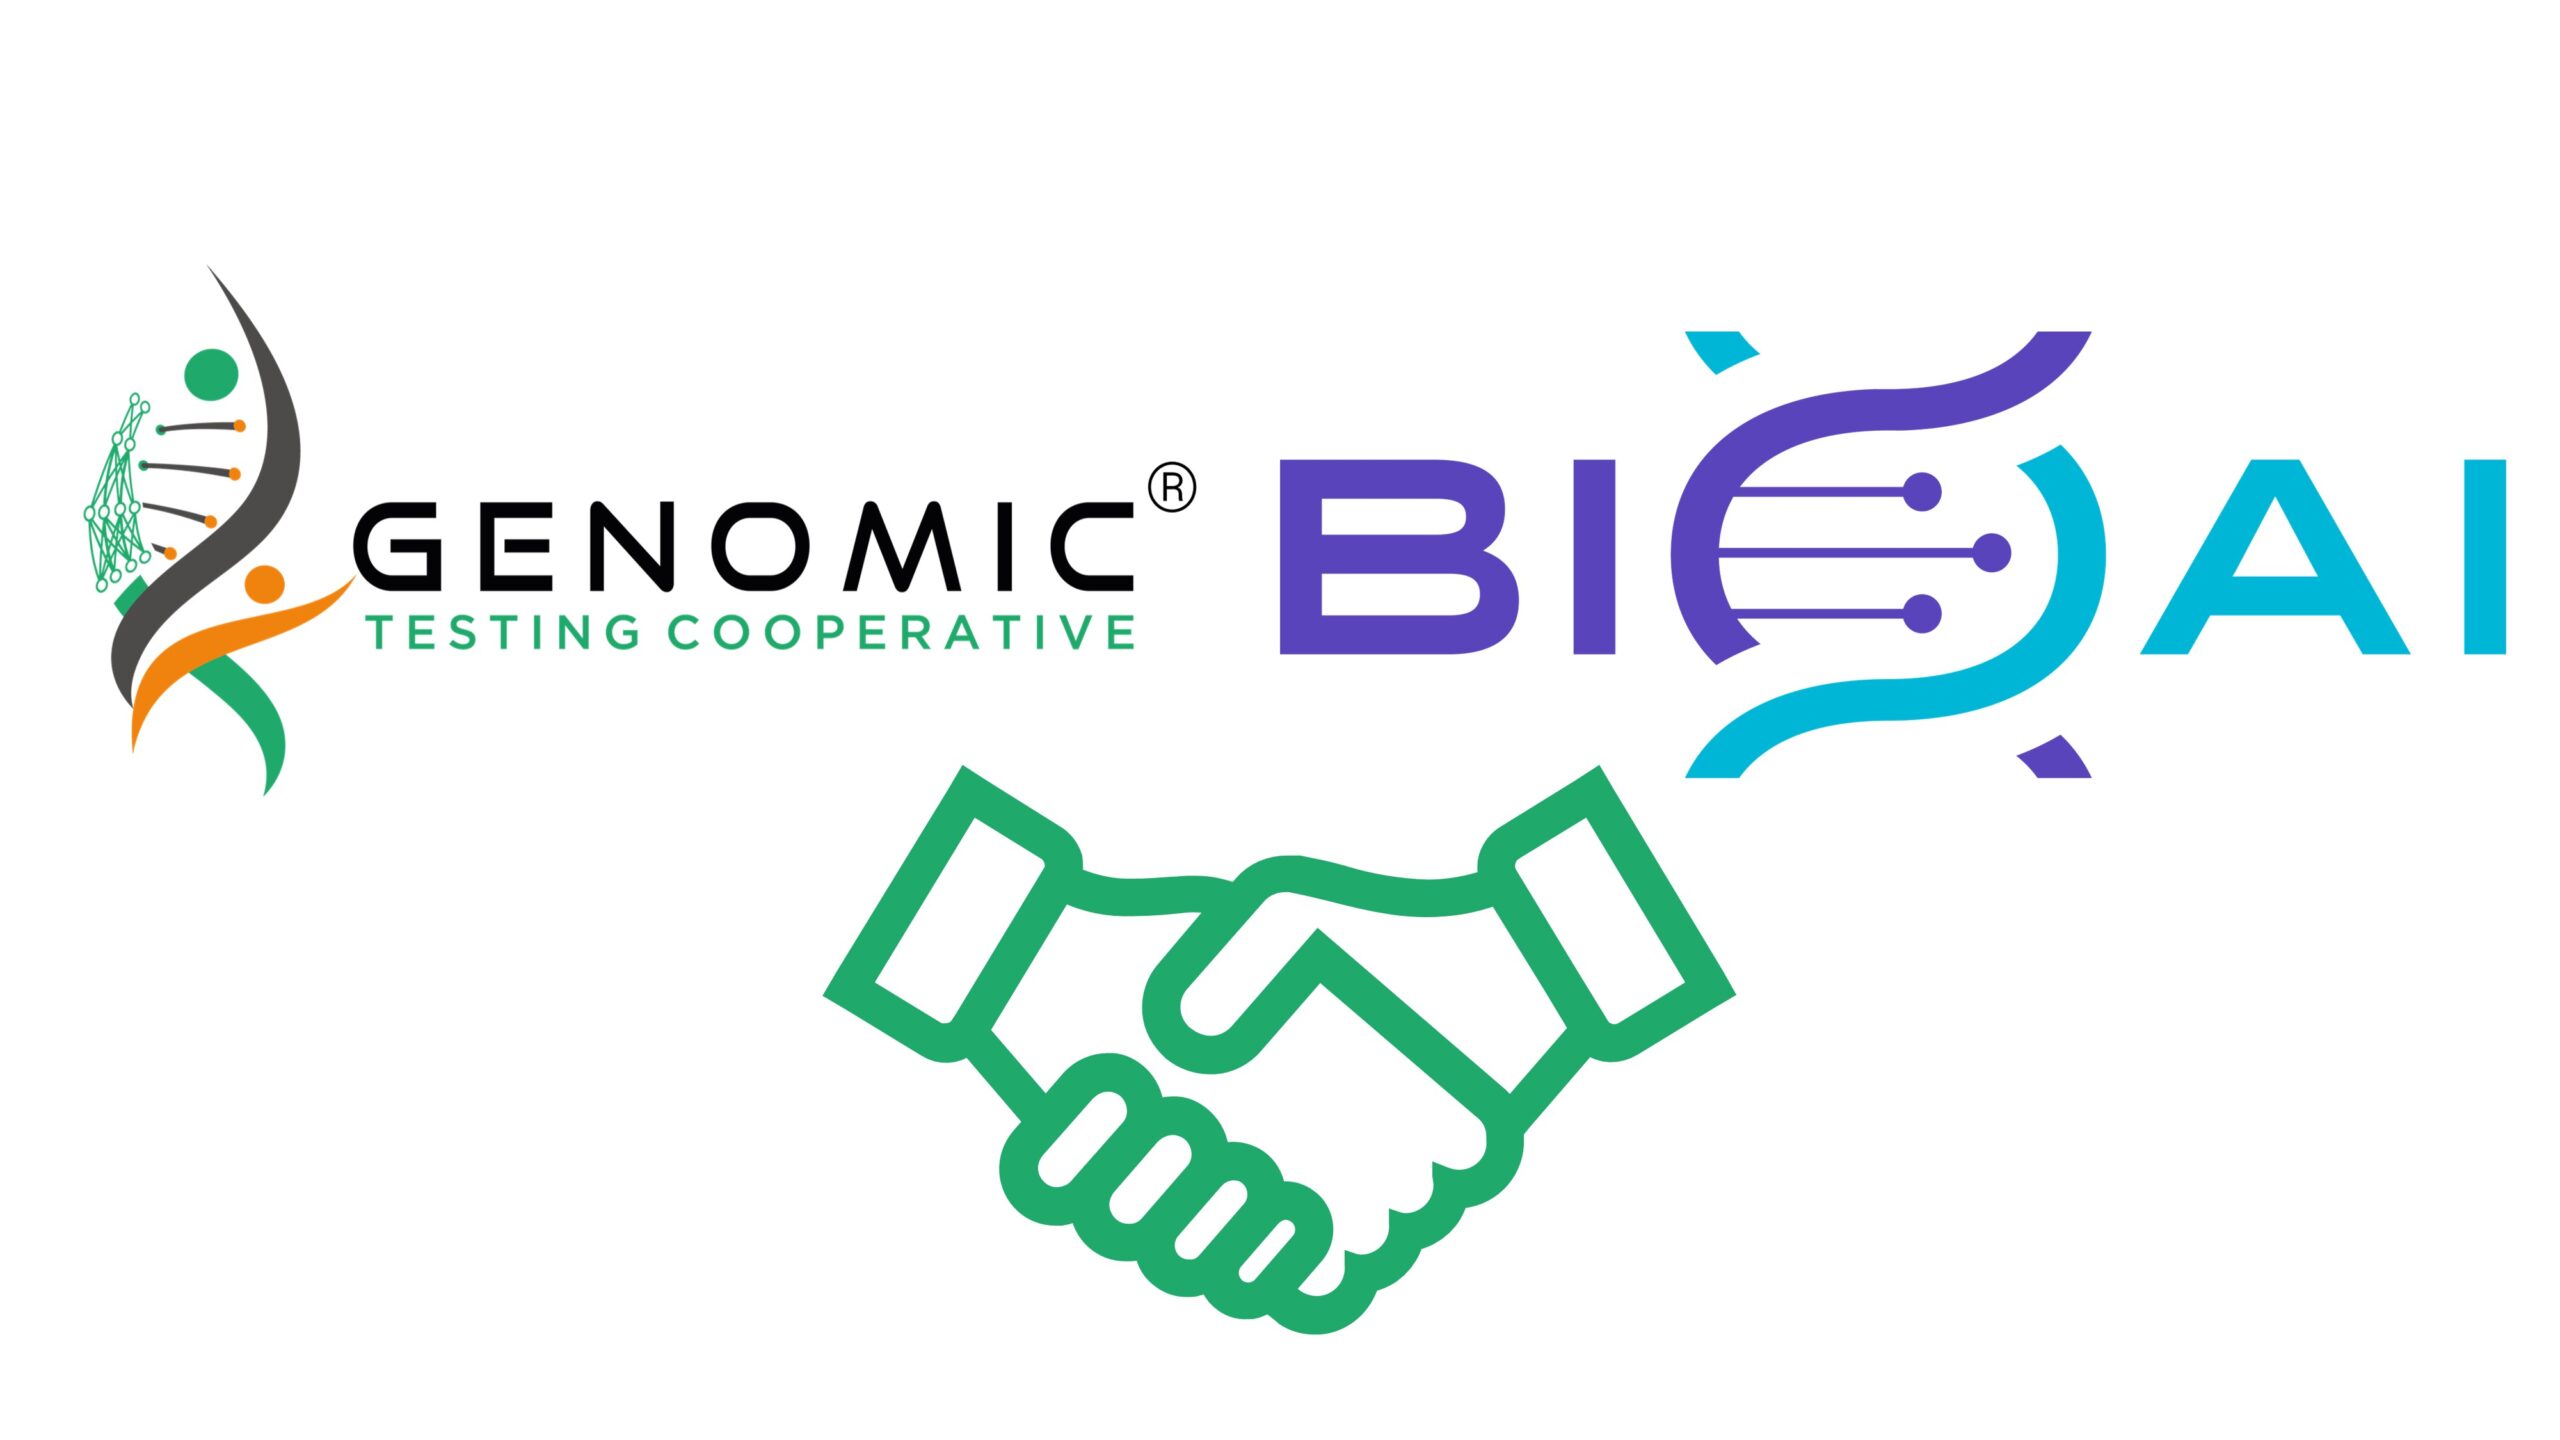 BioAI and Genomic Testing Cooperative Announce Strategic Collaboration to Provide AI-Powered Digital Pathology Solutions for Clinical Research and Diagnostic Applications